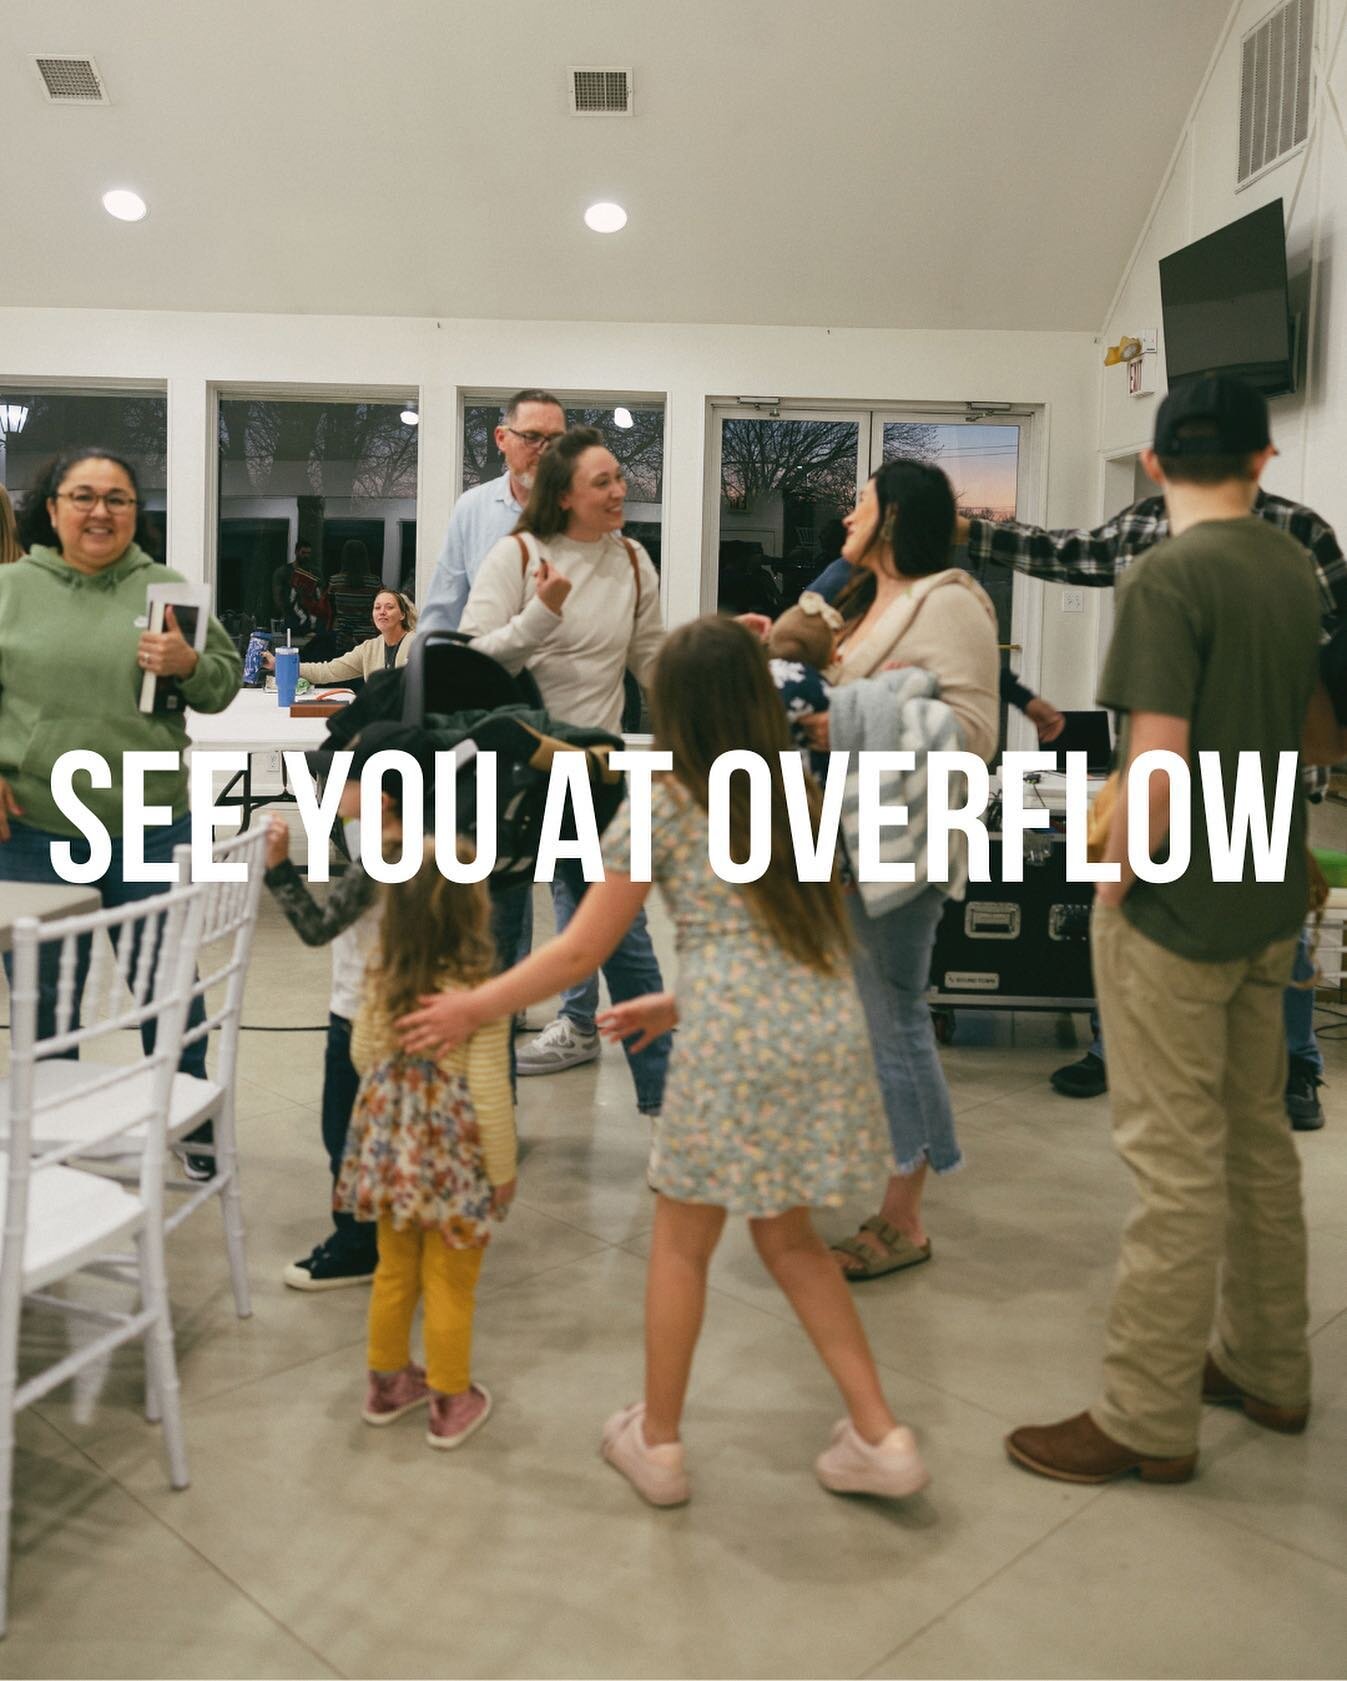 Overflow is tonight at 6:30! There's nothing better than being in His presence🕊 

See you there❤️❤️❤️